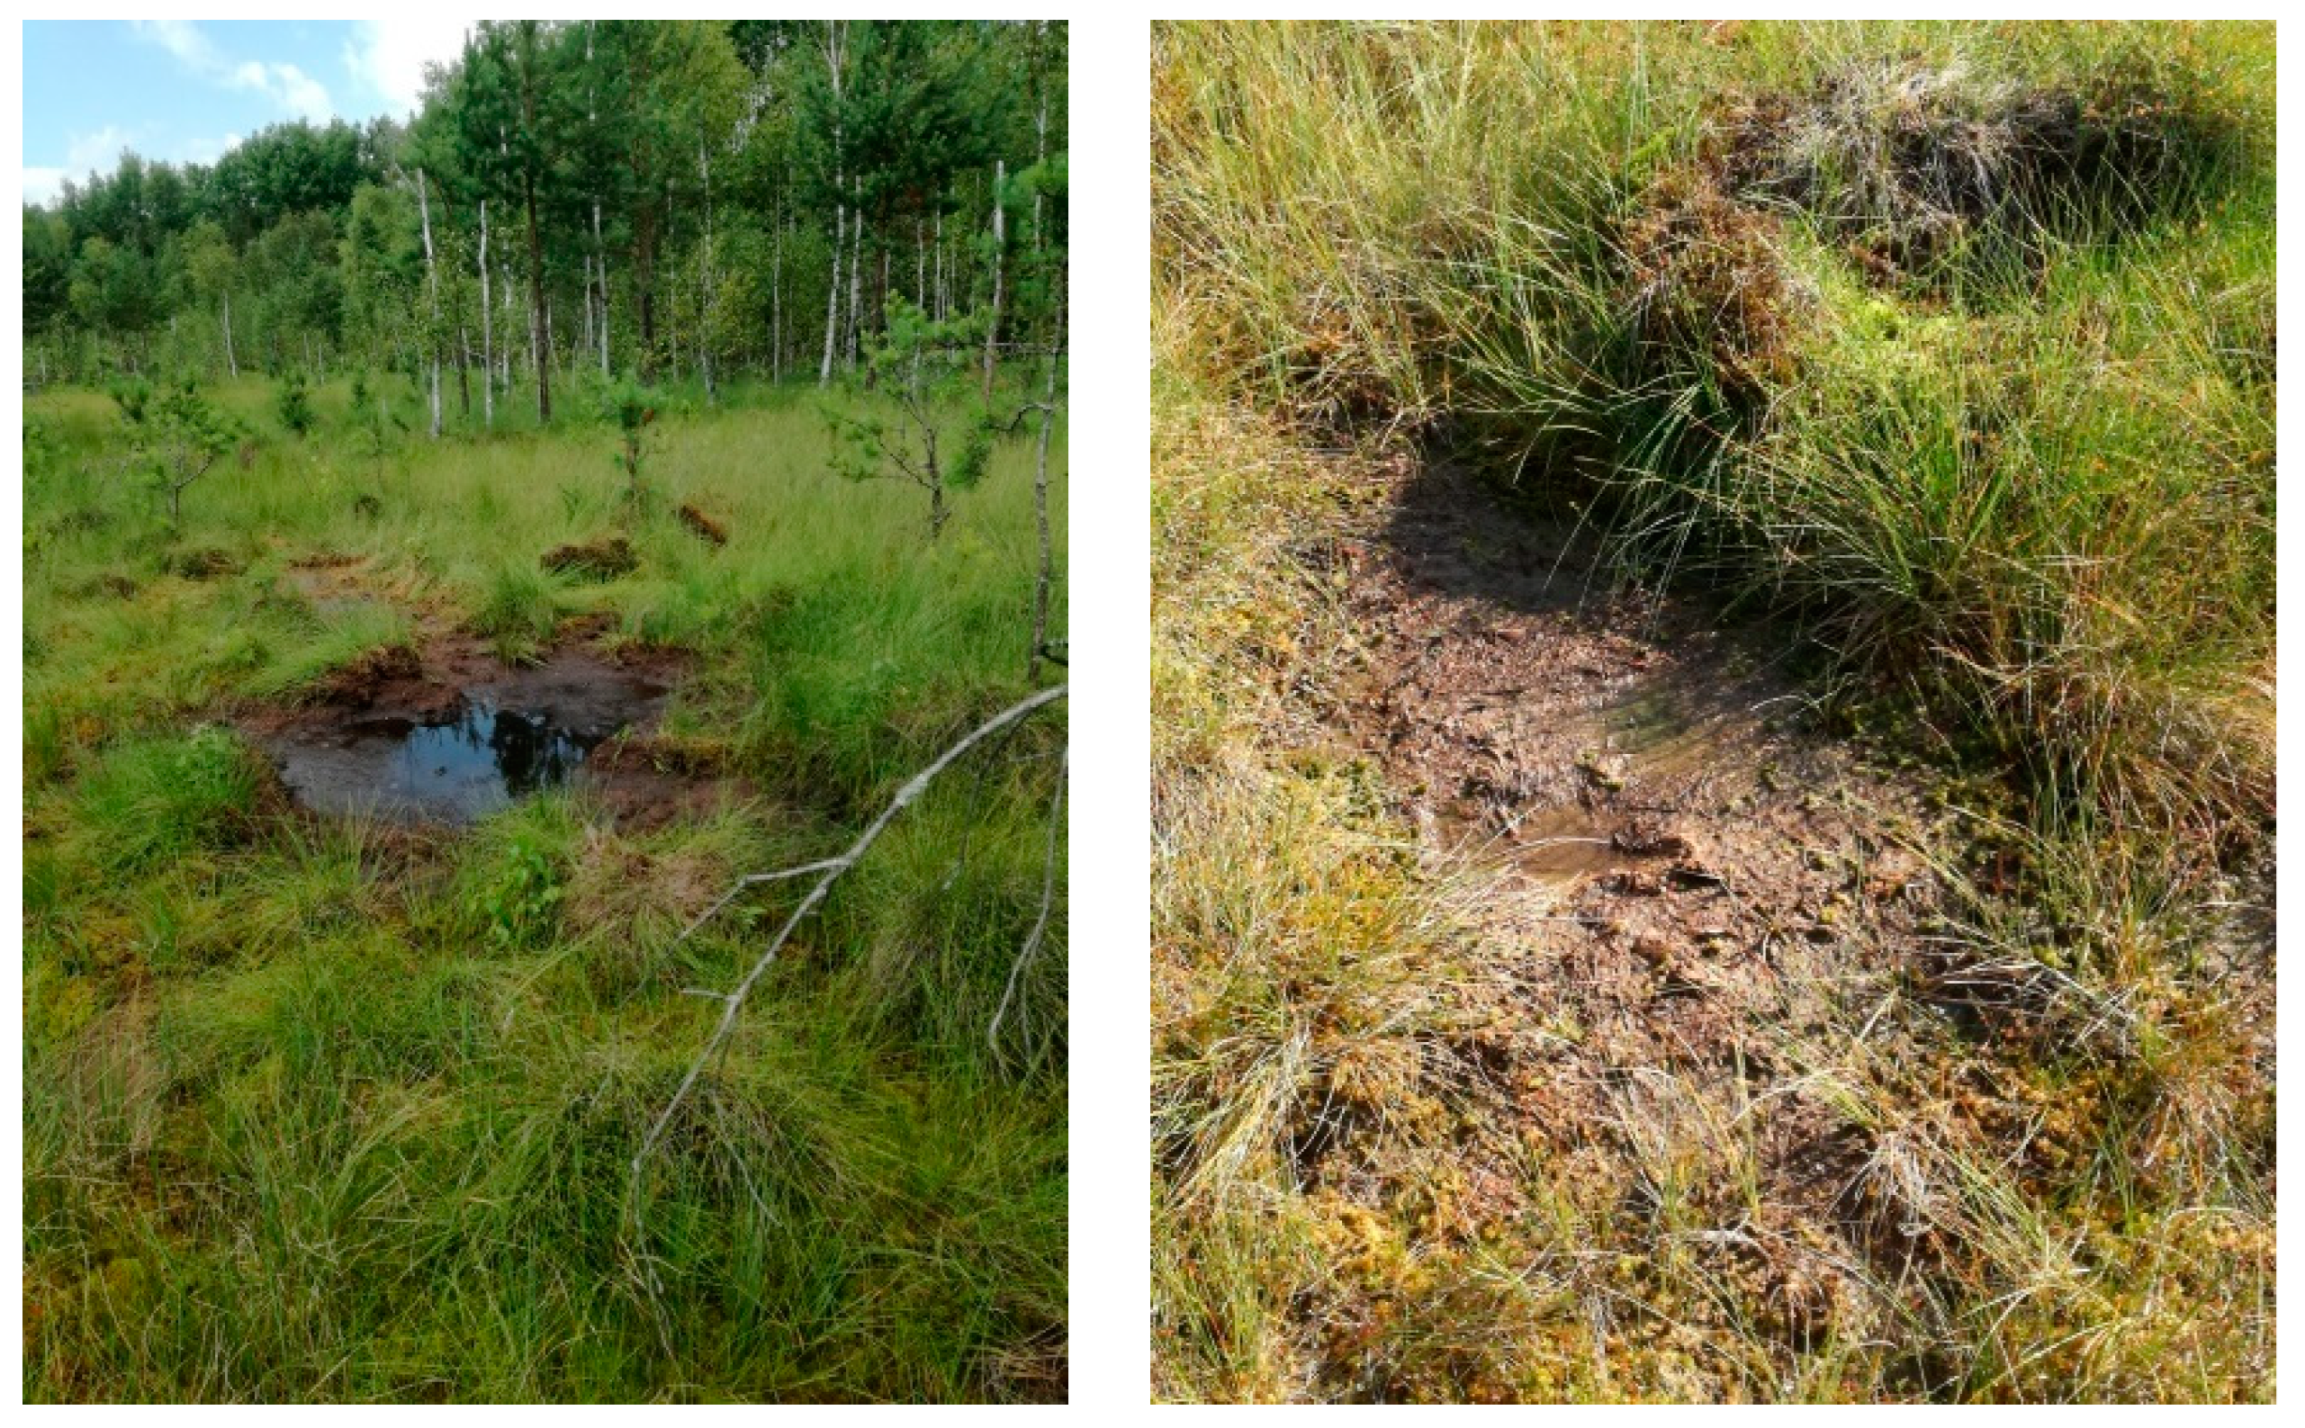 Water | Free Full-Text | Active Protection of Endangered Species of Peat Bog  Flora (Drosera intermedia, D. anglica) in the Łęczna-Włodawa  Lake District